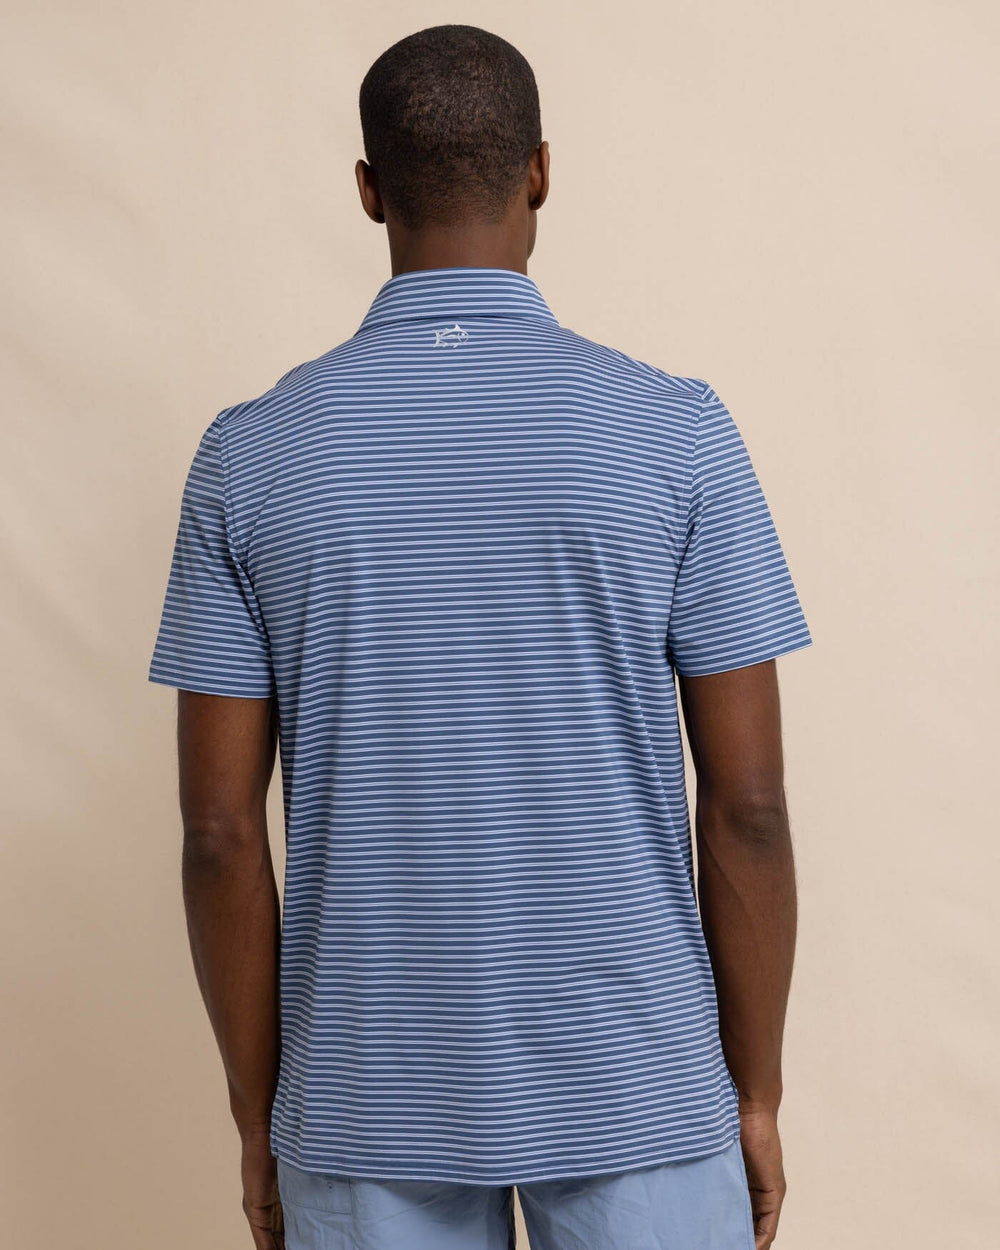 The back view of the Southern Tide brrr eeze Beattie Stripe Performance Polo by Southern Tide - Aged Denim